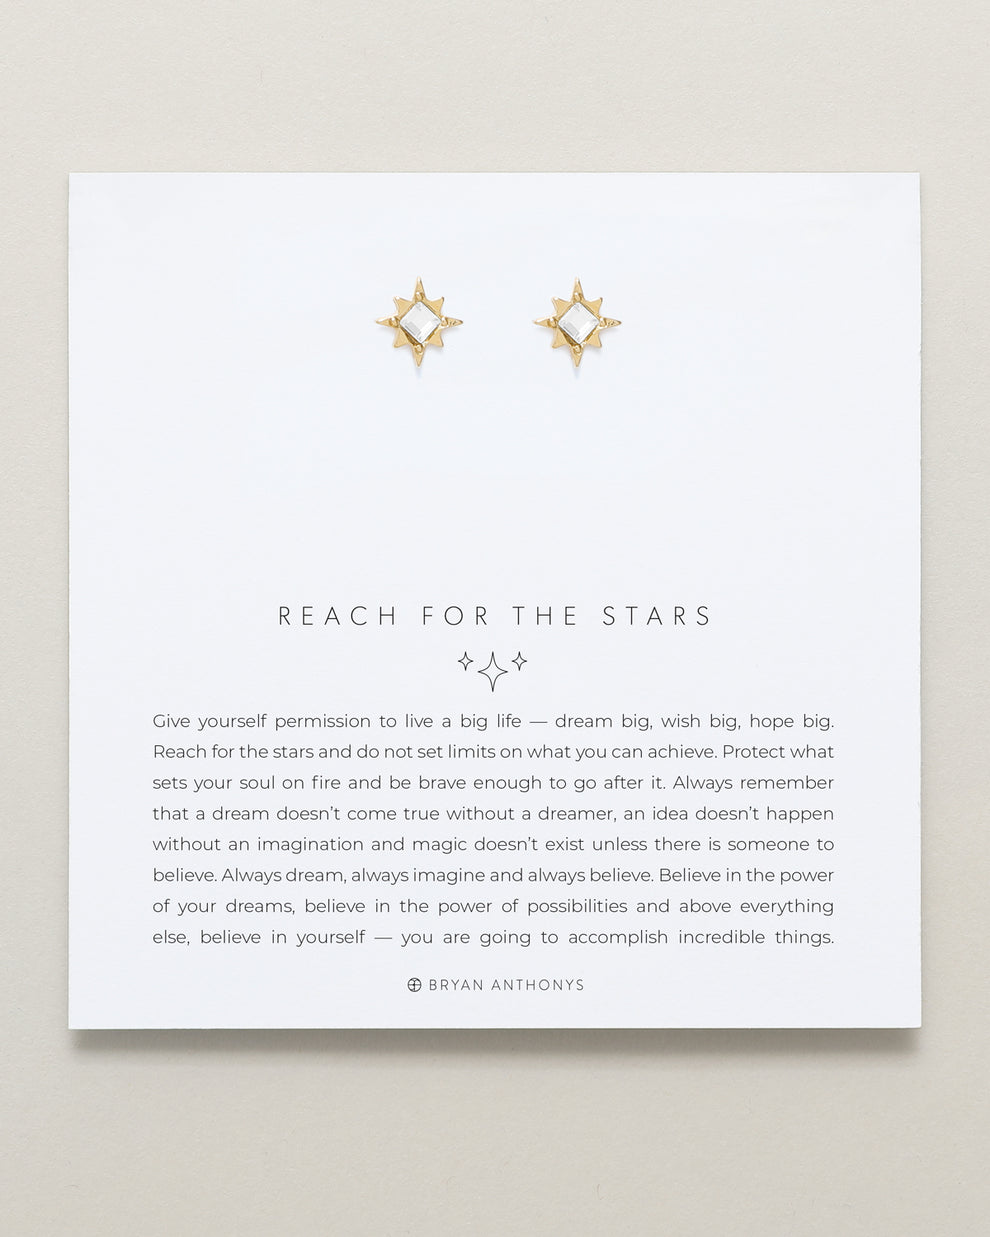 Bryan Anthonys "Reach for the Stars" Earrings-Gold